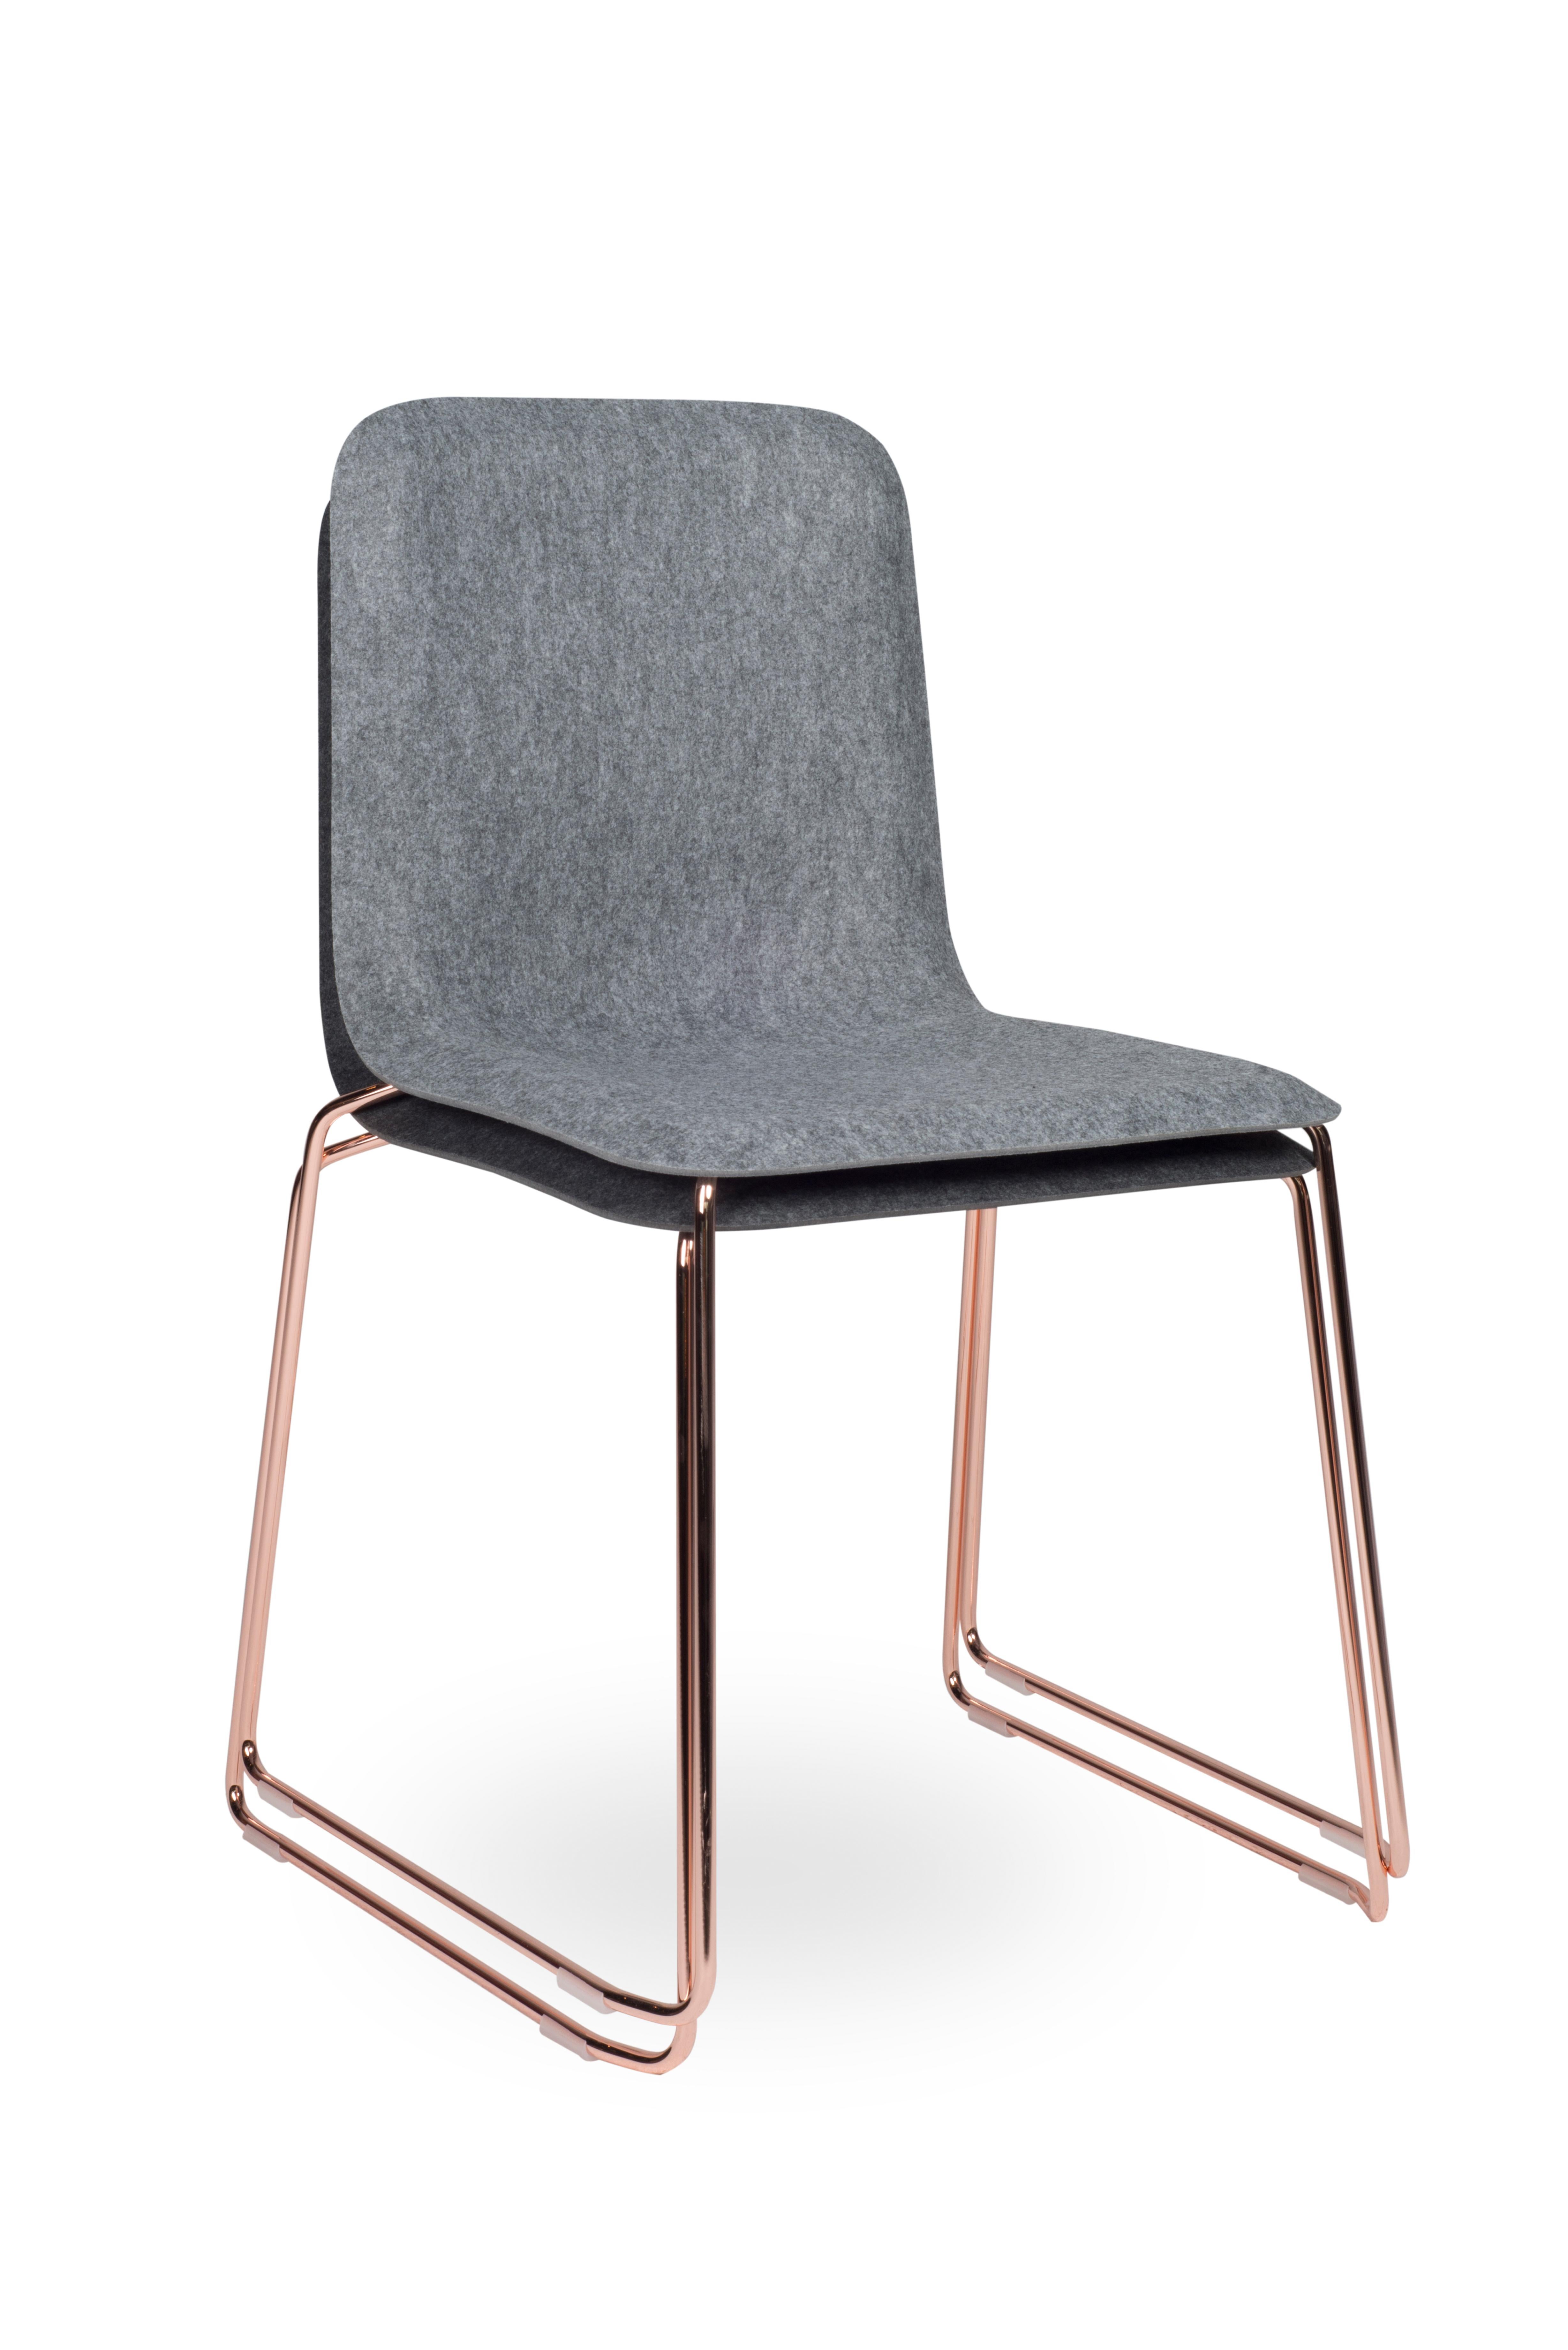 Lensvelt This 141 Felt Chair In New Condition For Sale In Amsterdam, NL